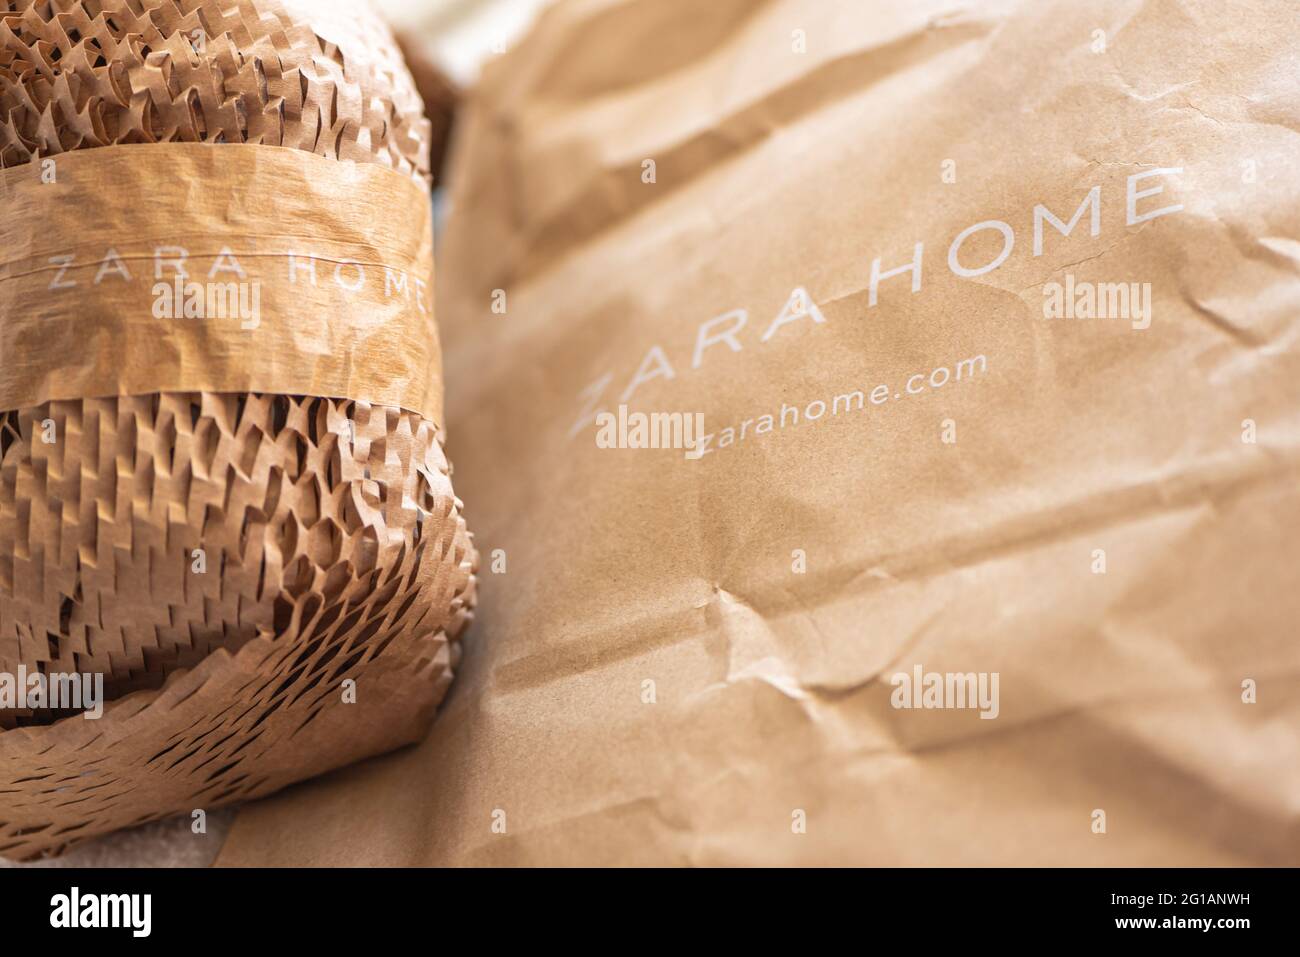 Packaging paper with Zara home brand name at bright light Stock Photo -  Alamy